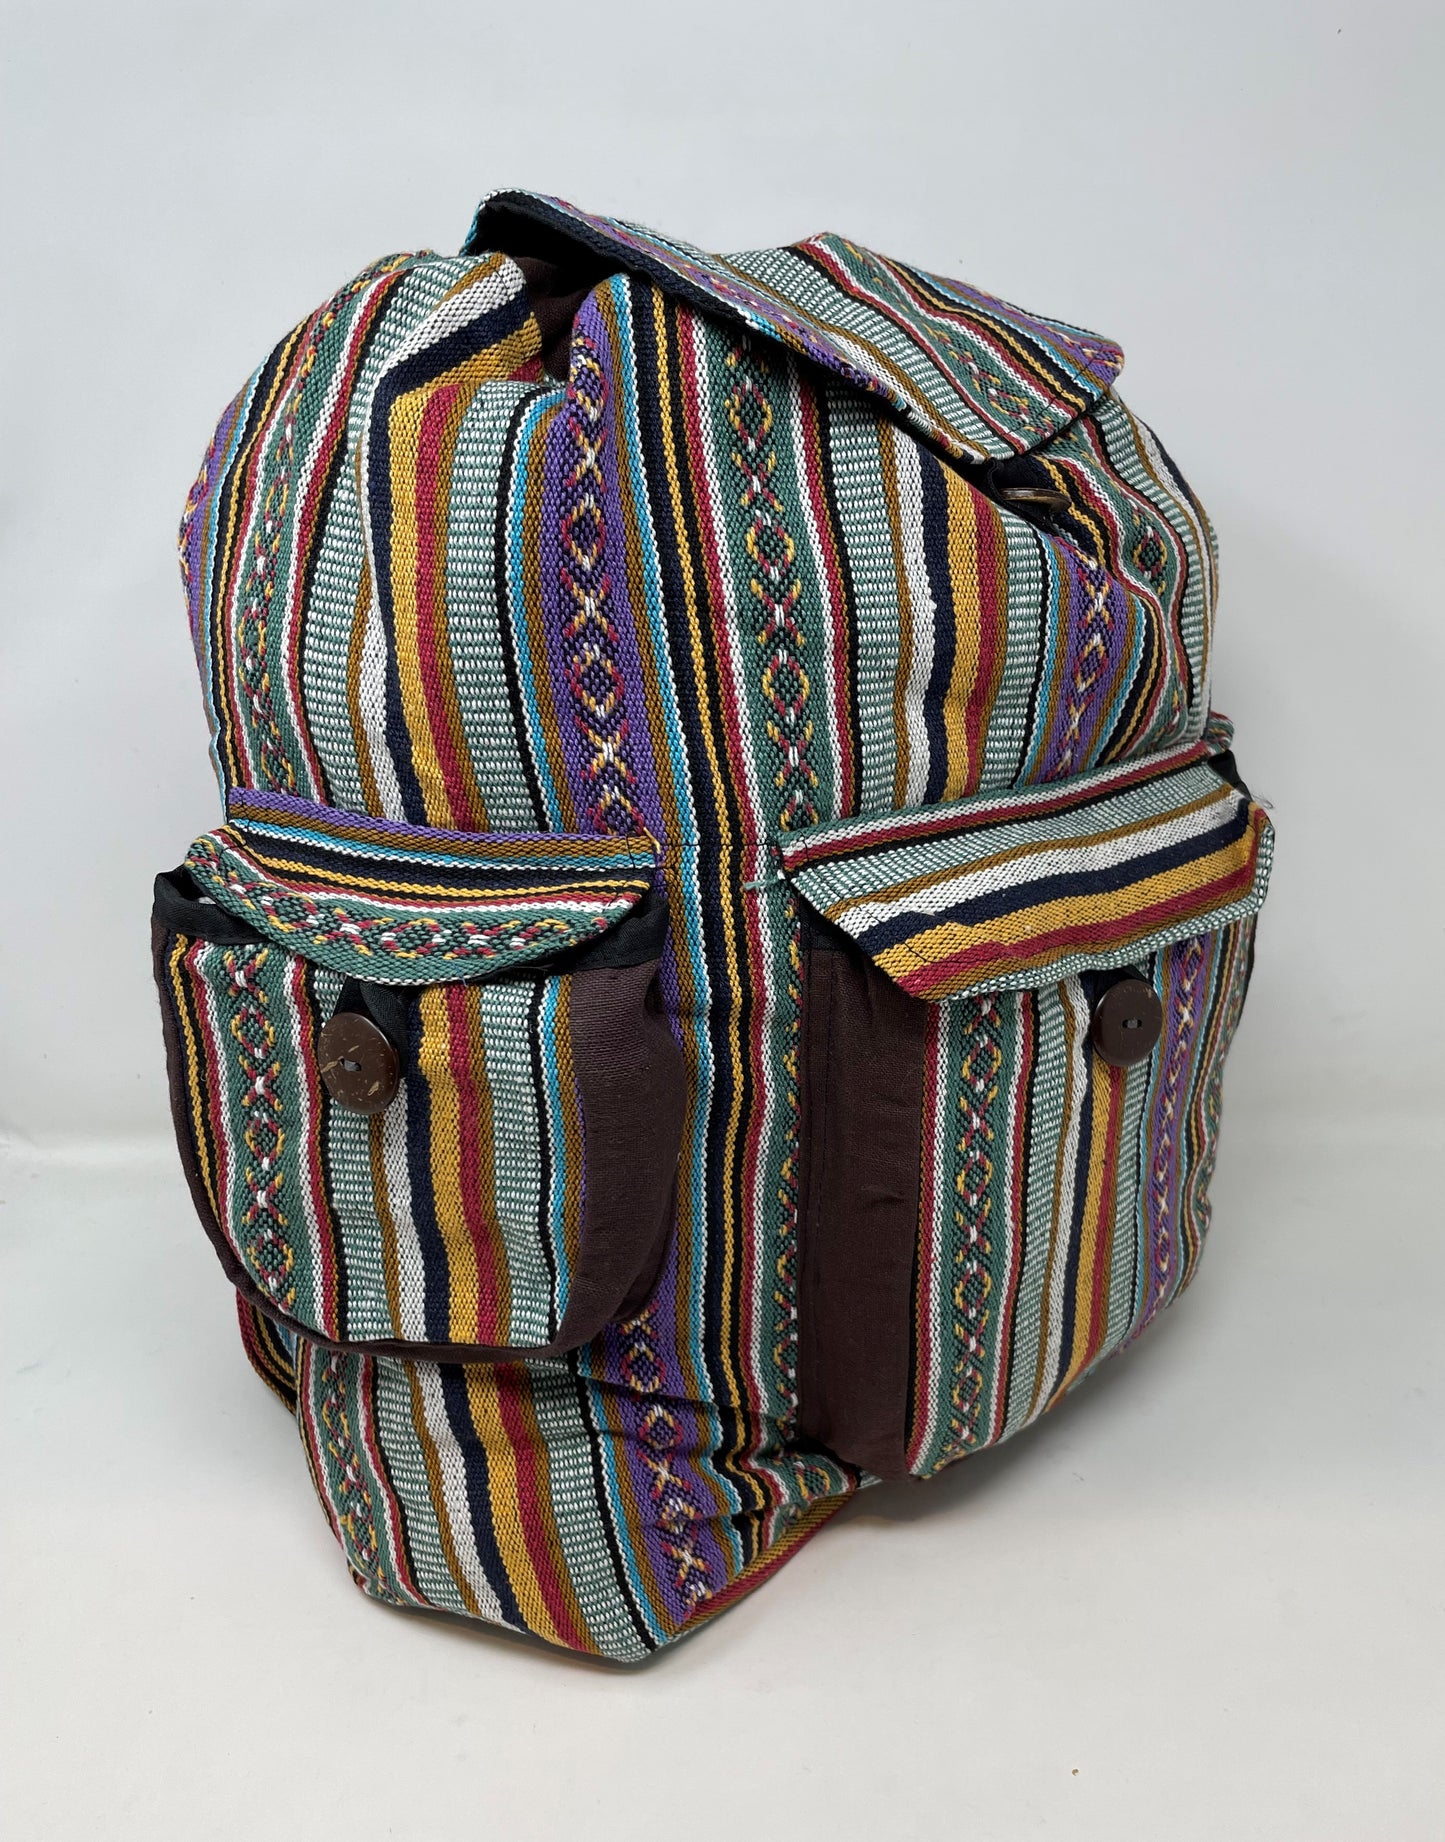 Unisex large Back Pack w/Pockets - Beautiful Colorful  Woven Fabric Design